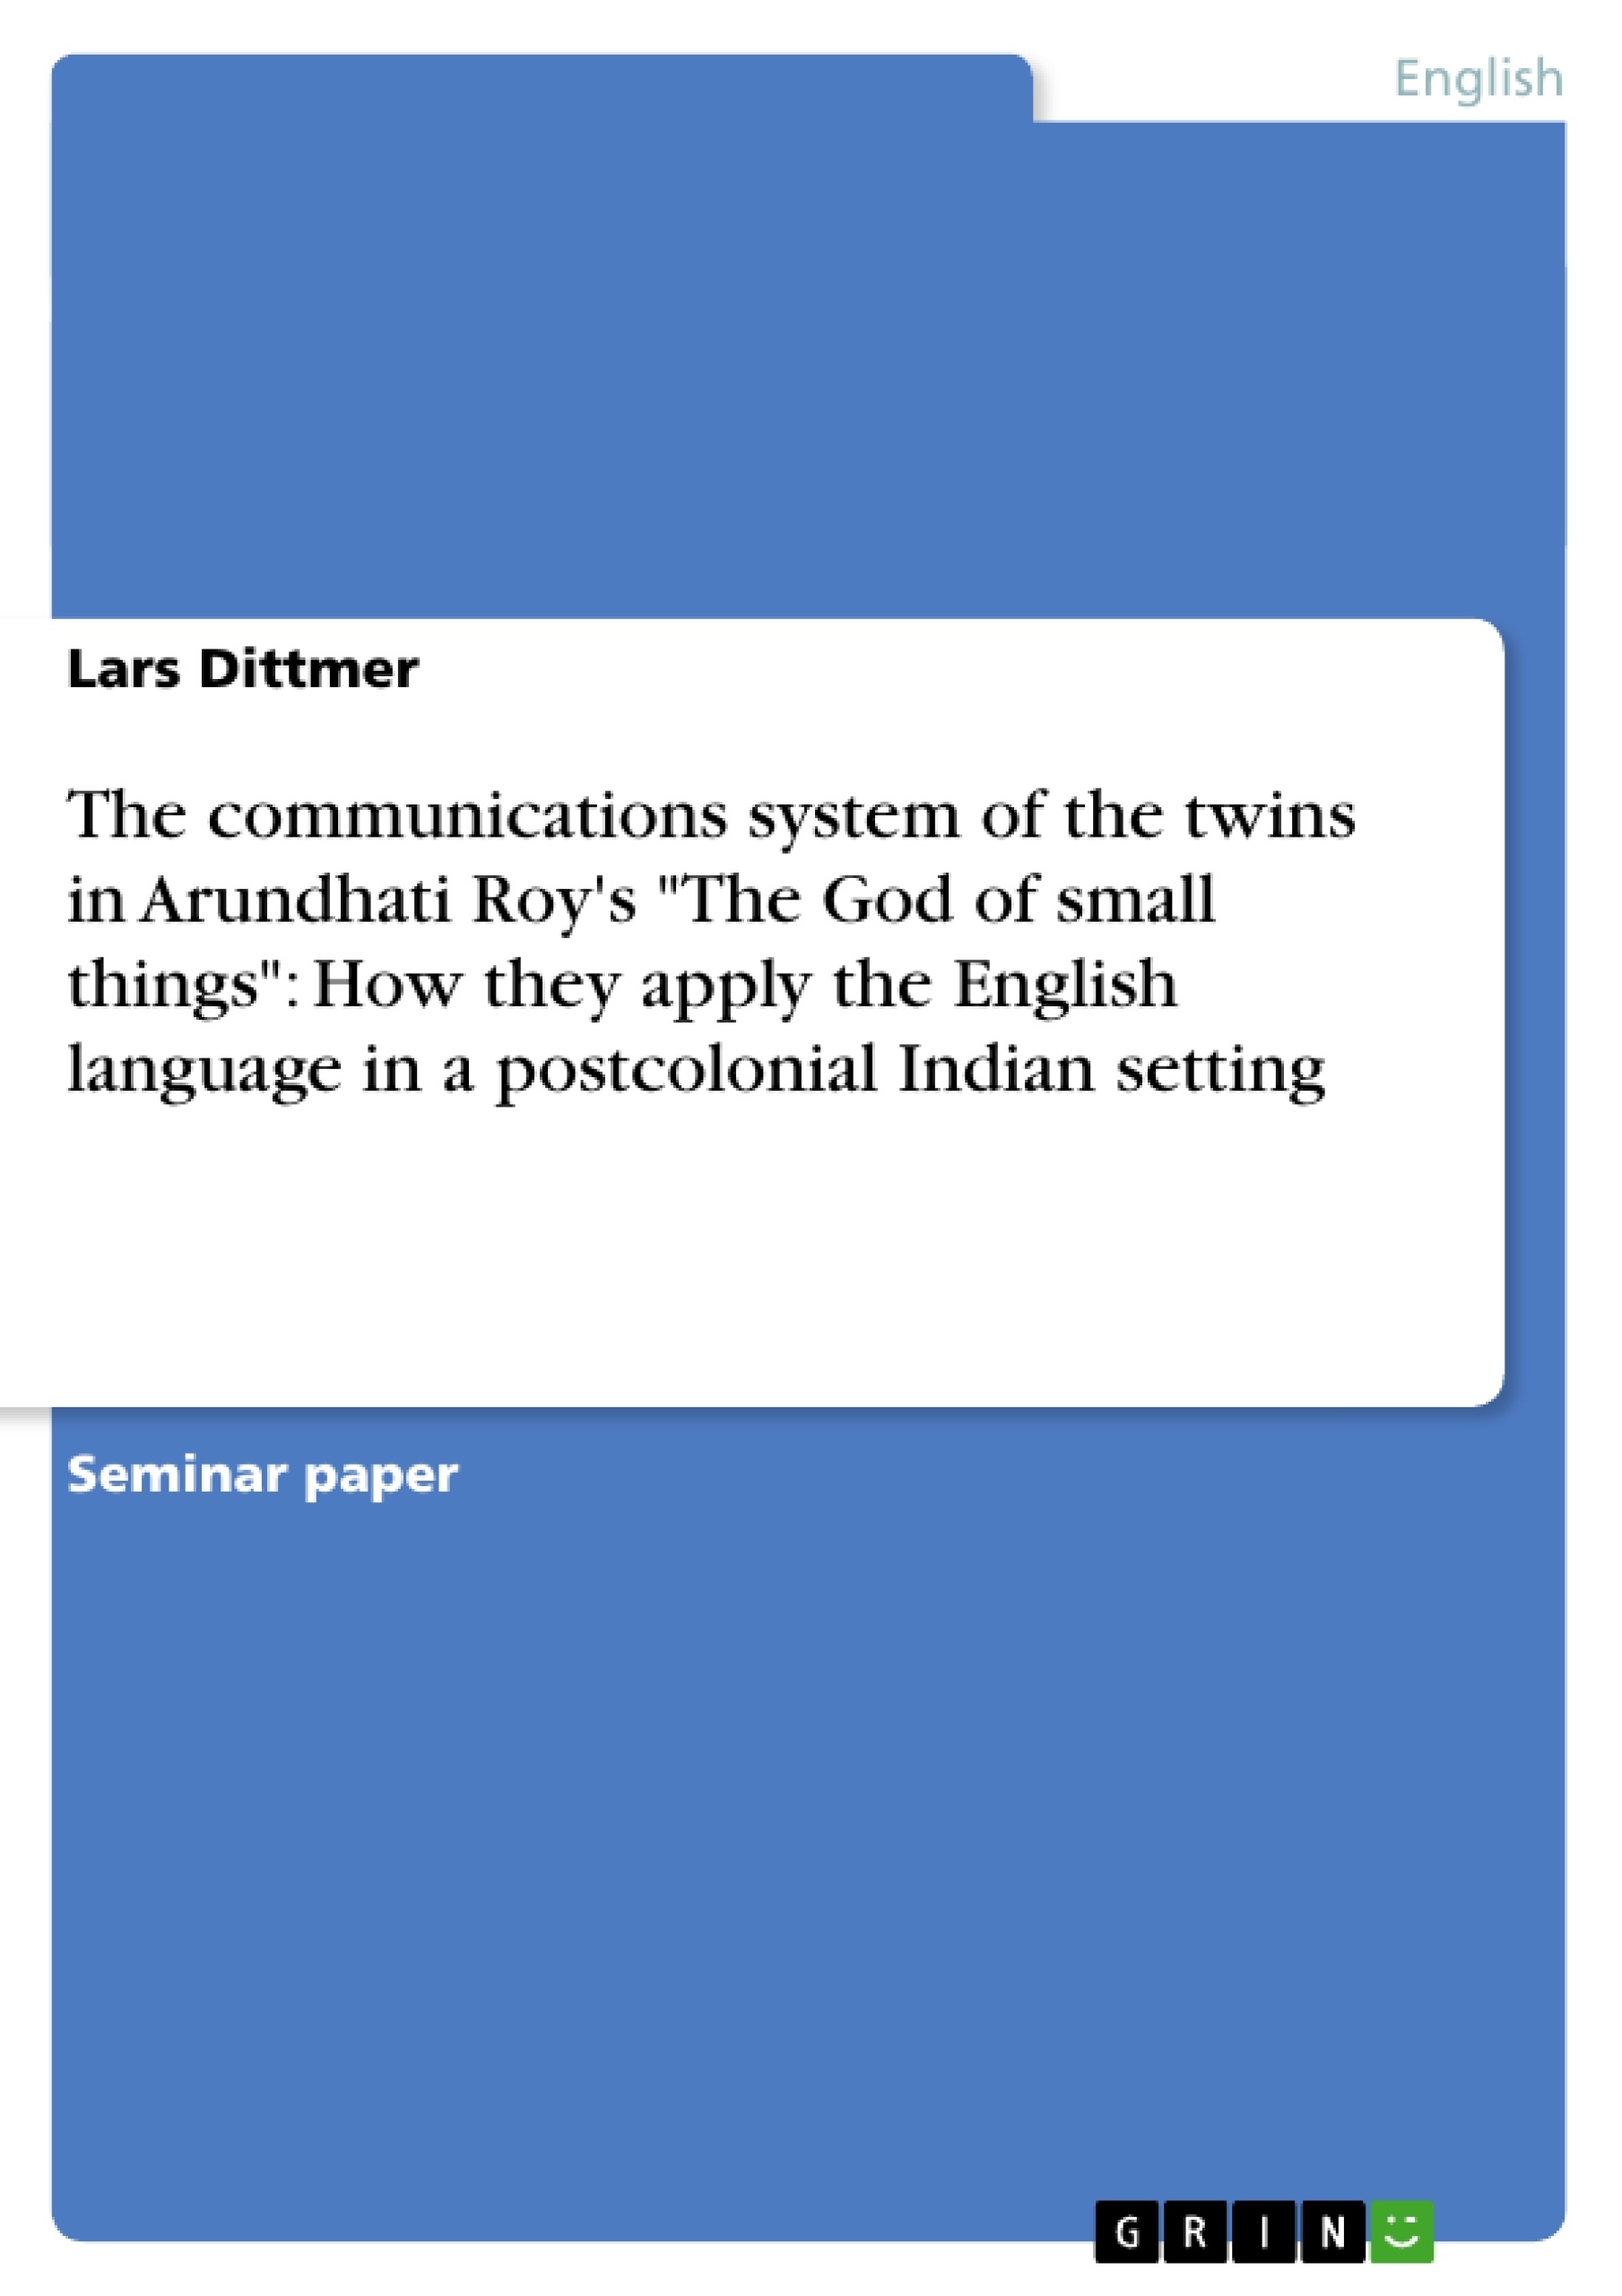 Título: The communications system of the twins in Arundhati Roy's "The God of small things": How they apply the English language in a postcolonial Indian setting